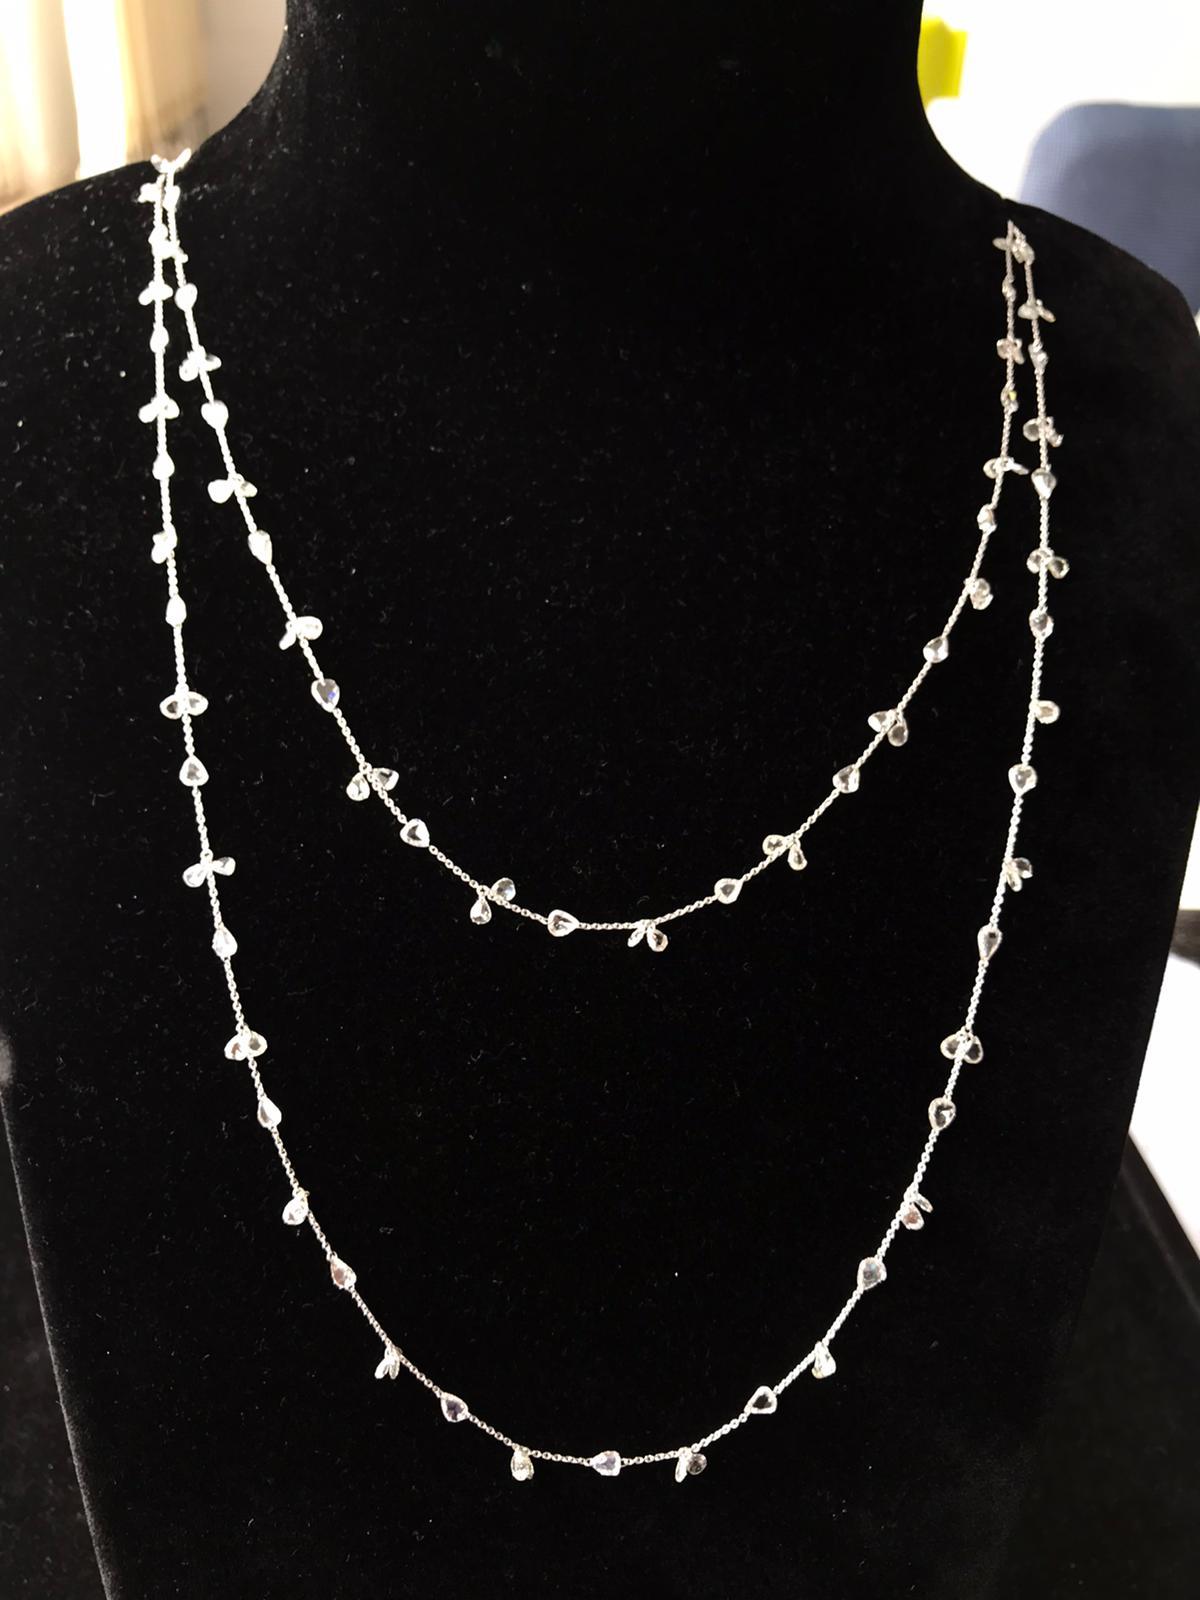 PANIM 13.24 Carat Diamond Rosecut 18K White Gold Floral Necklace In New Condition For Sale In Tsim Sha Tsui, Hong Kong